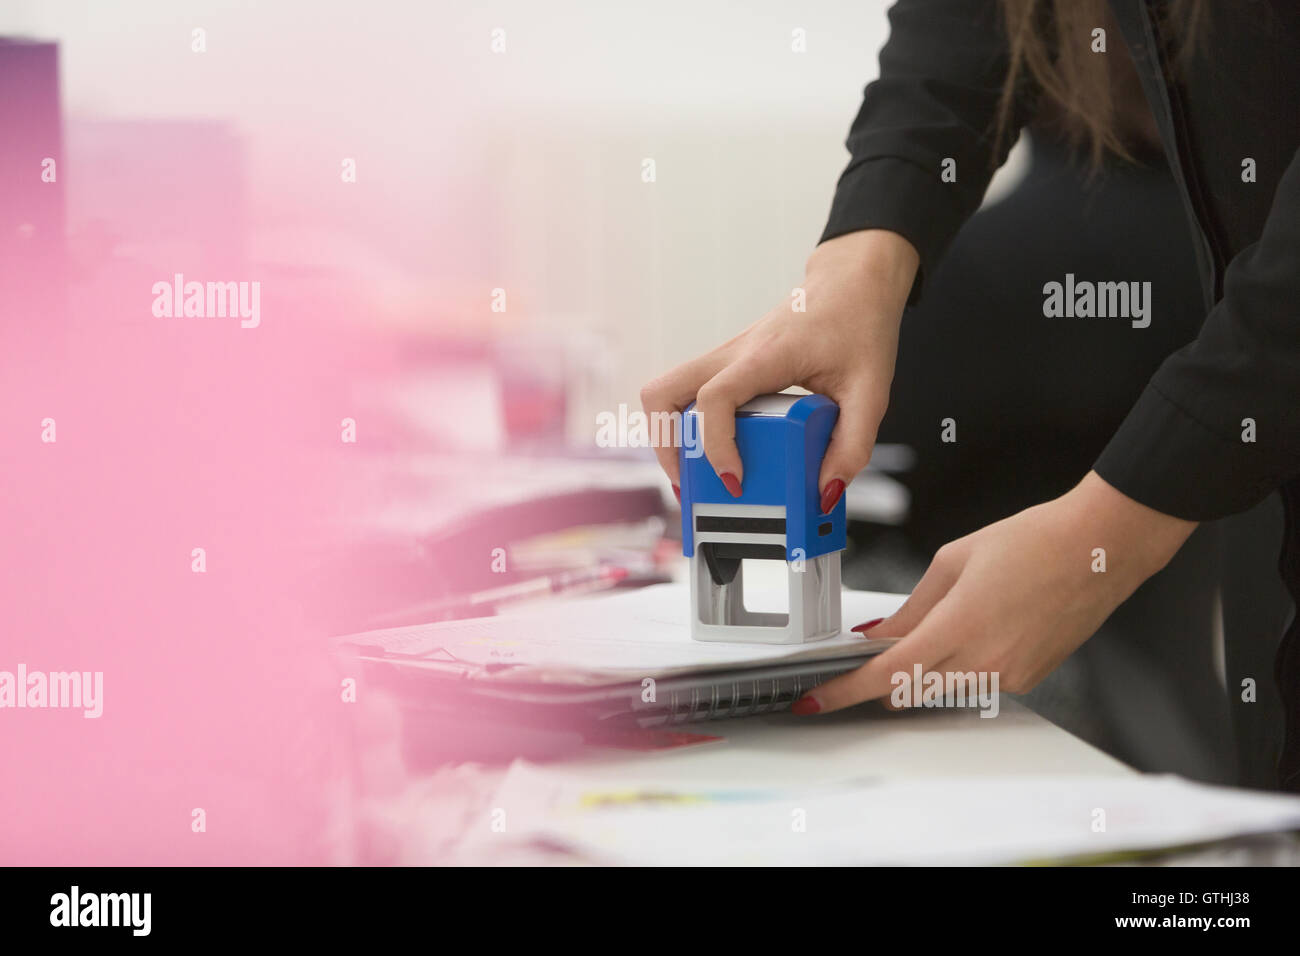 Businesswoman using stamp on paperwork in office Stock Photo